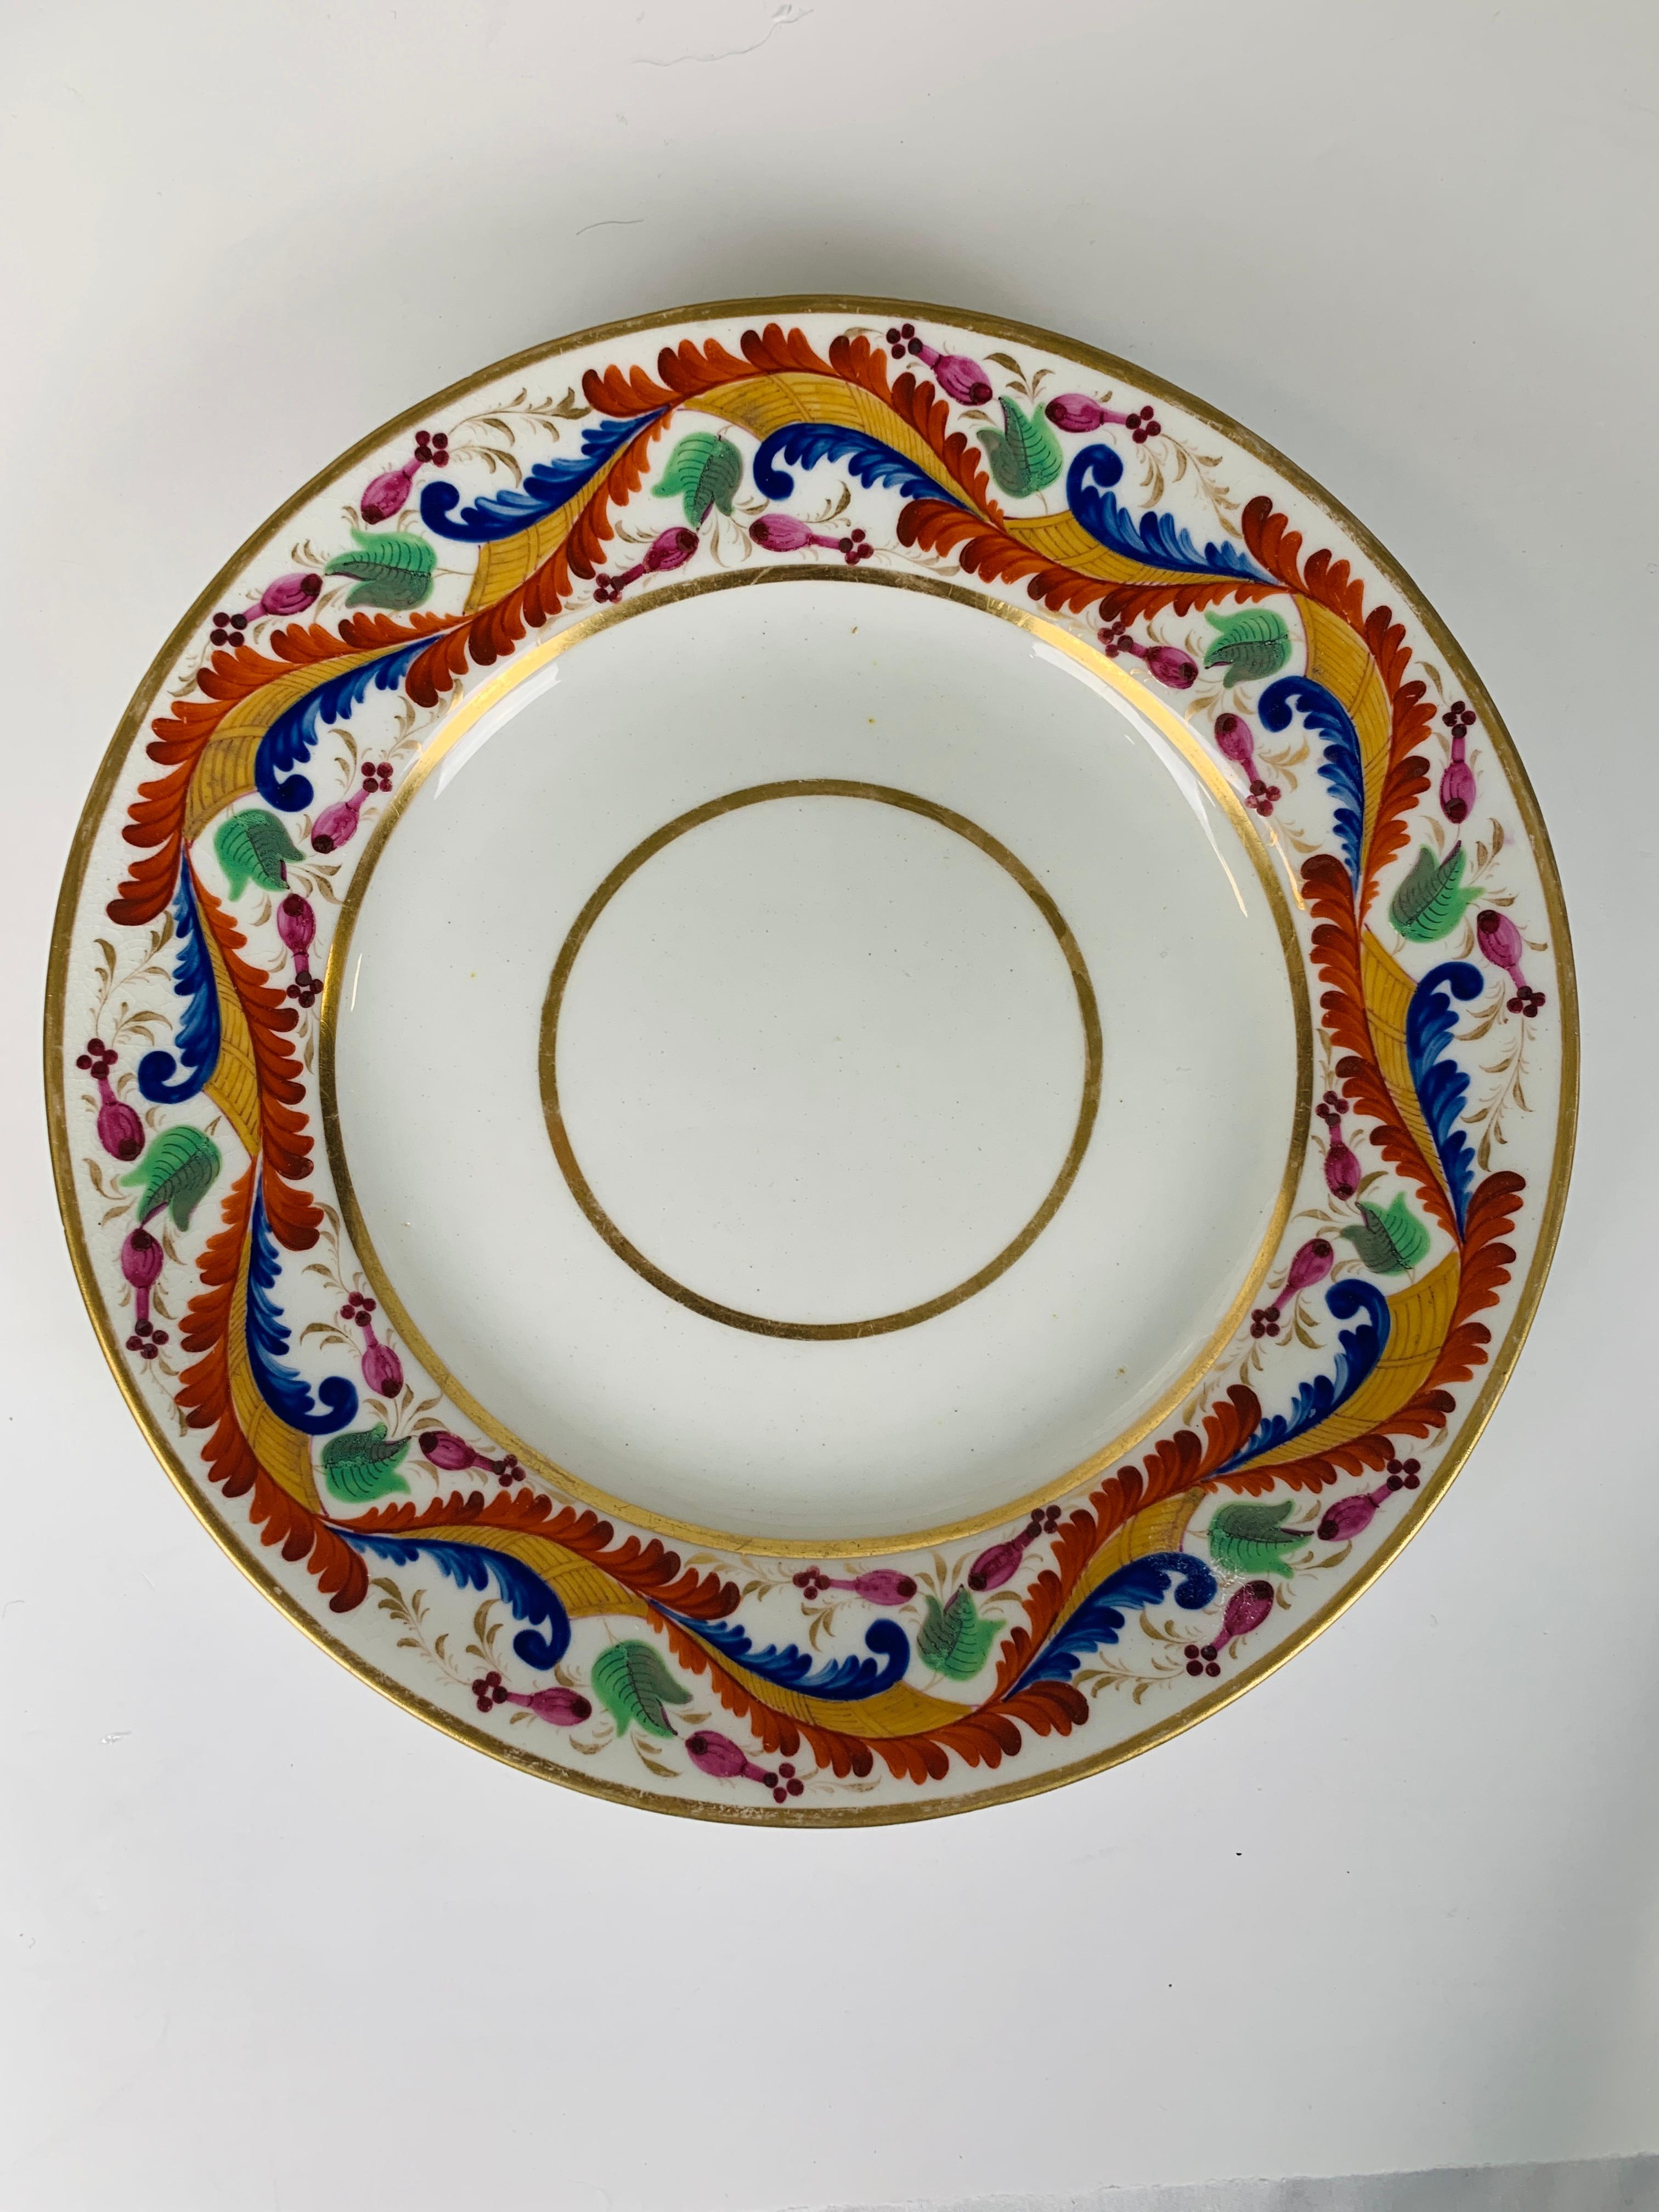 Regency Set of Five Derby Dishes Hand-Painted in England, circa 1810